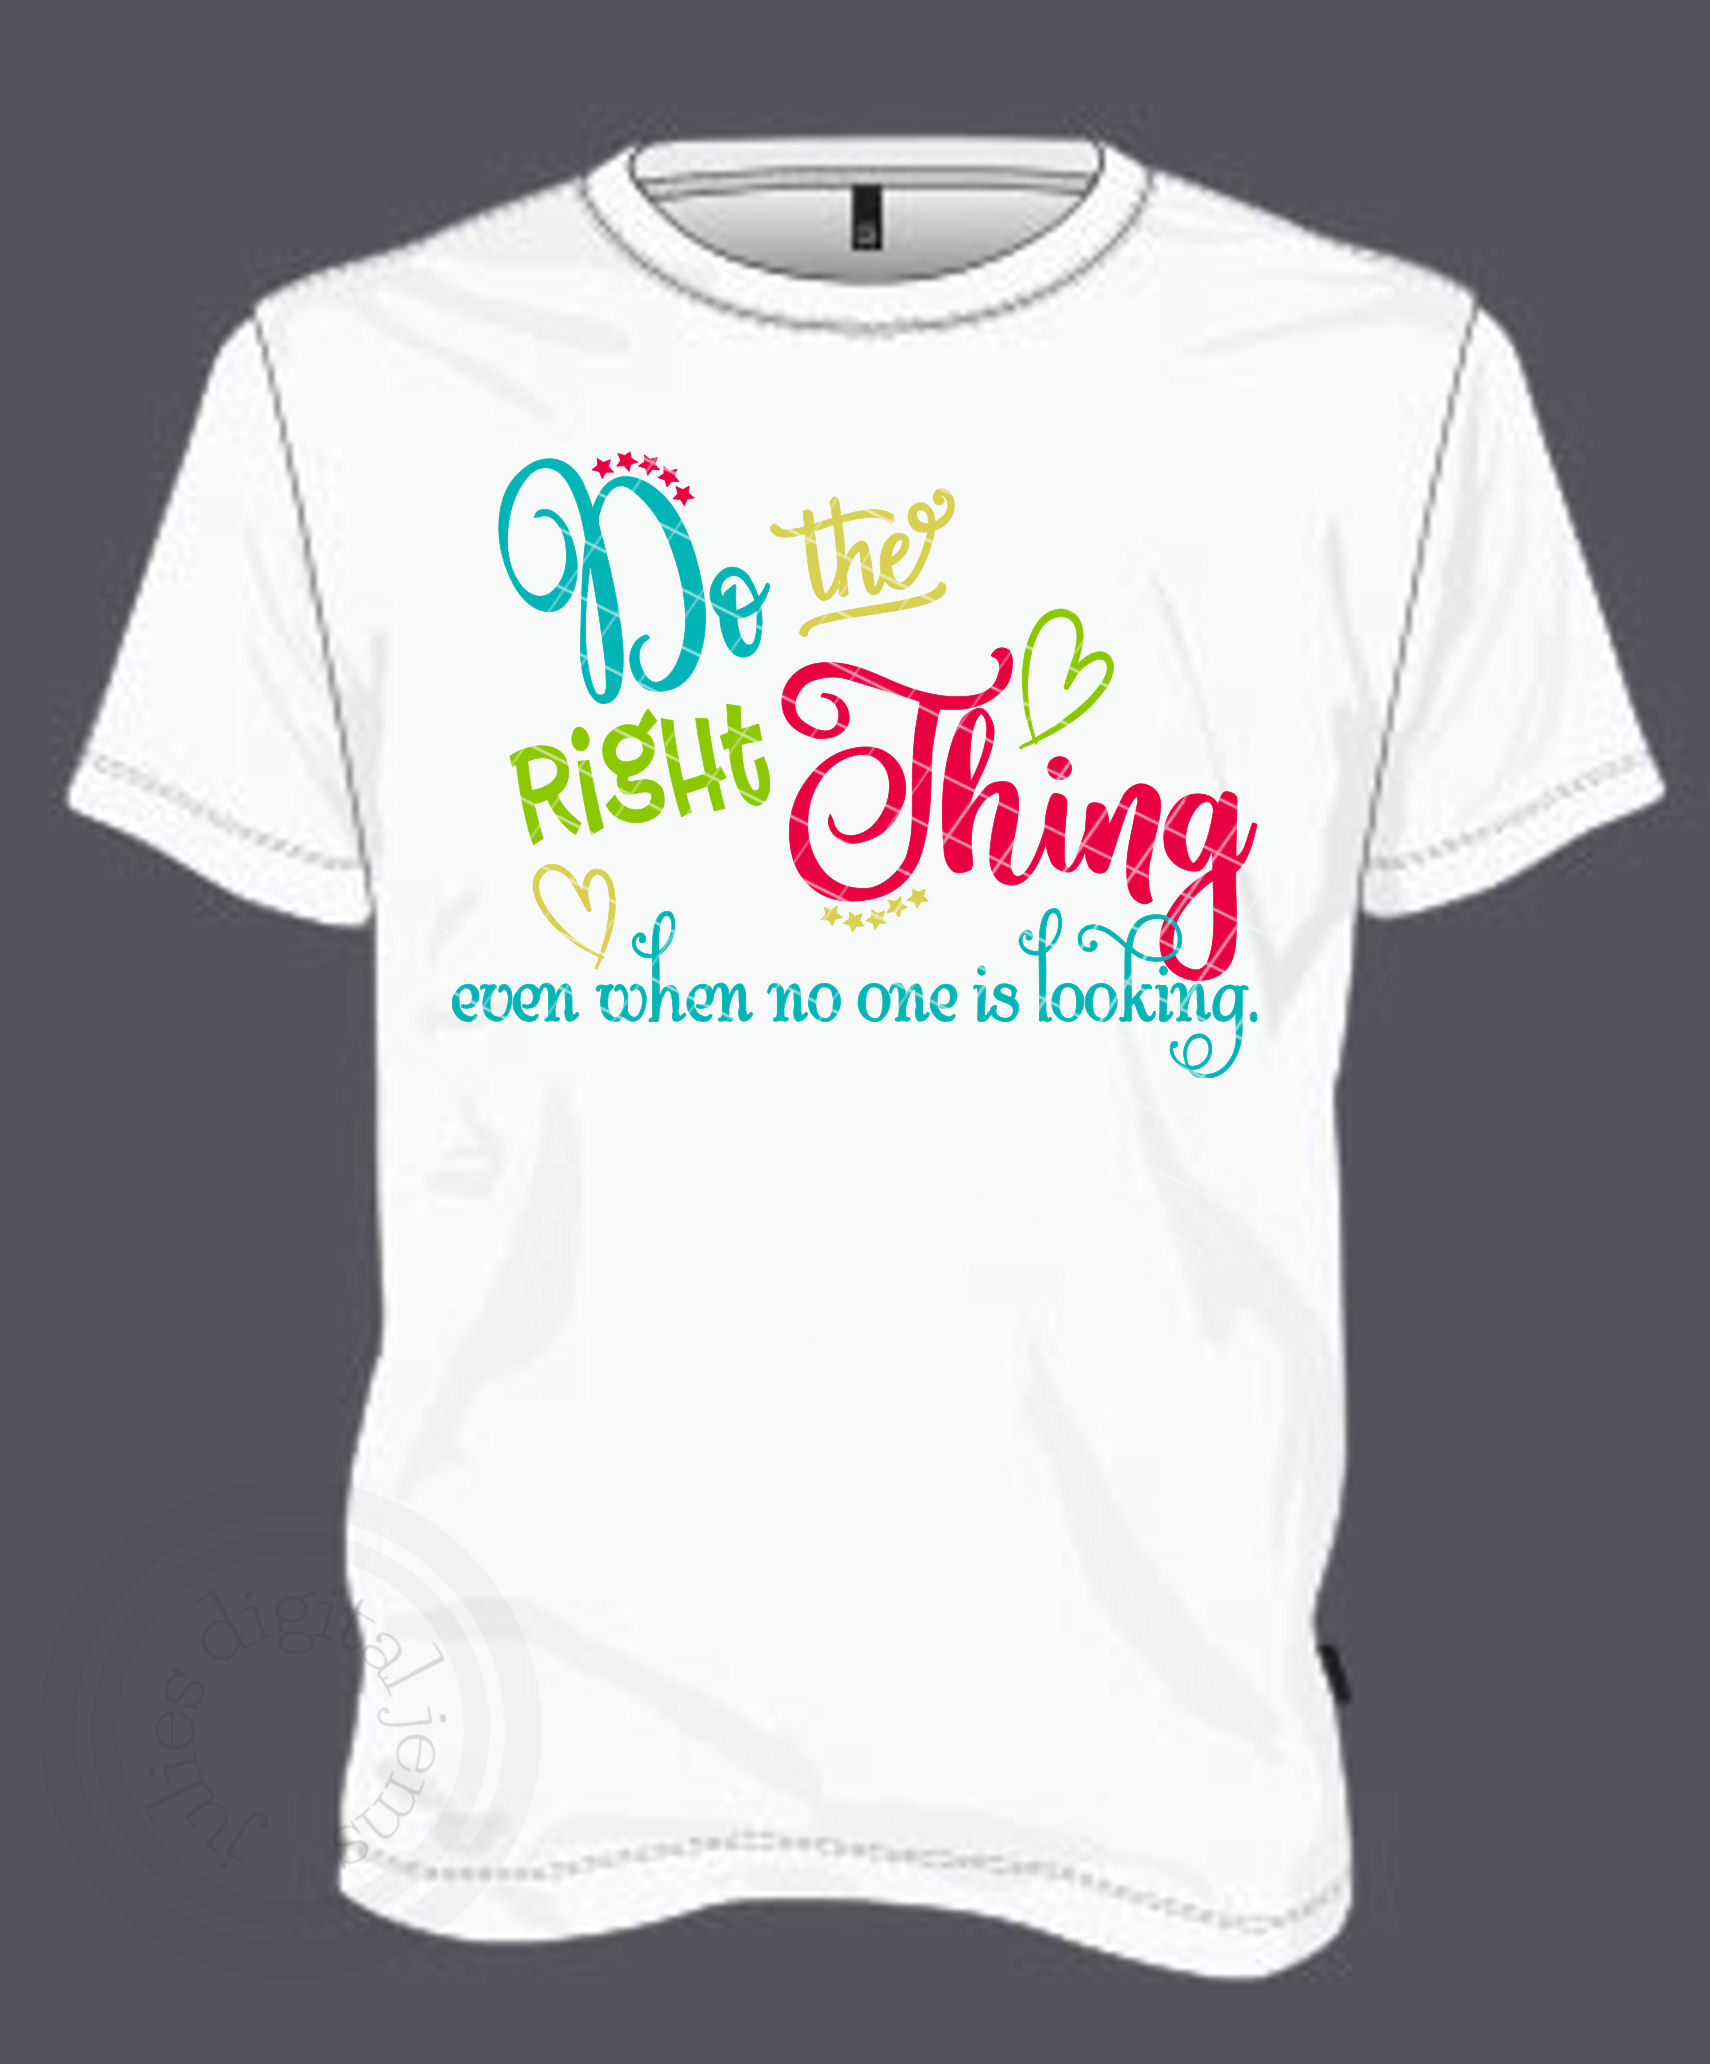 Download Do the Right thing shirt, Christian sayings SVG, Inspiration